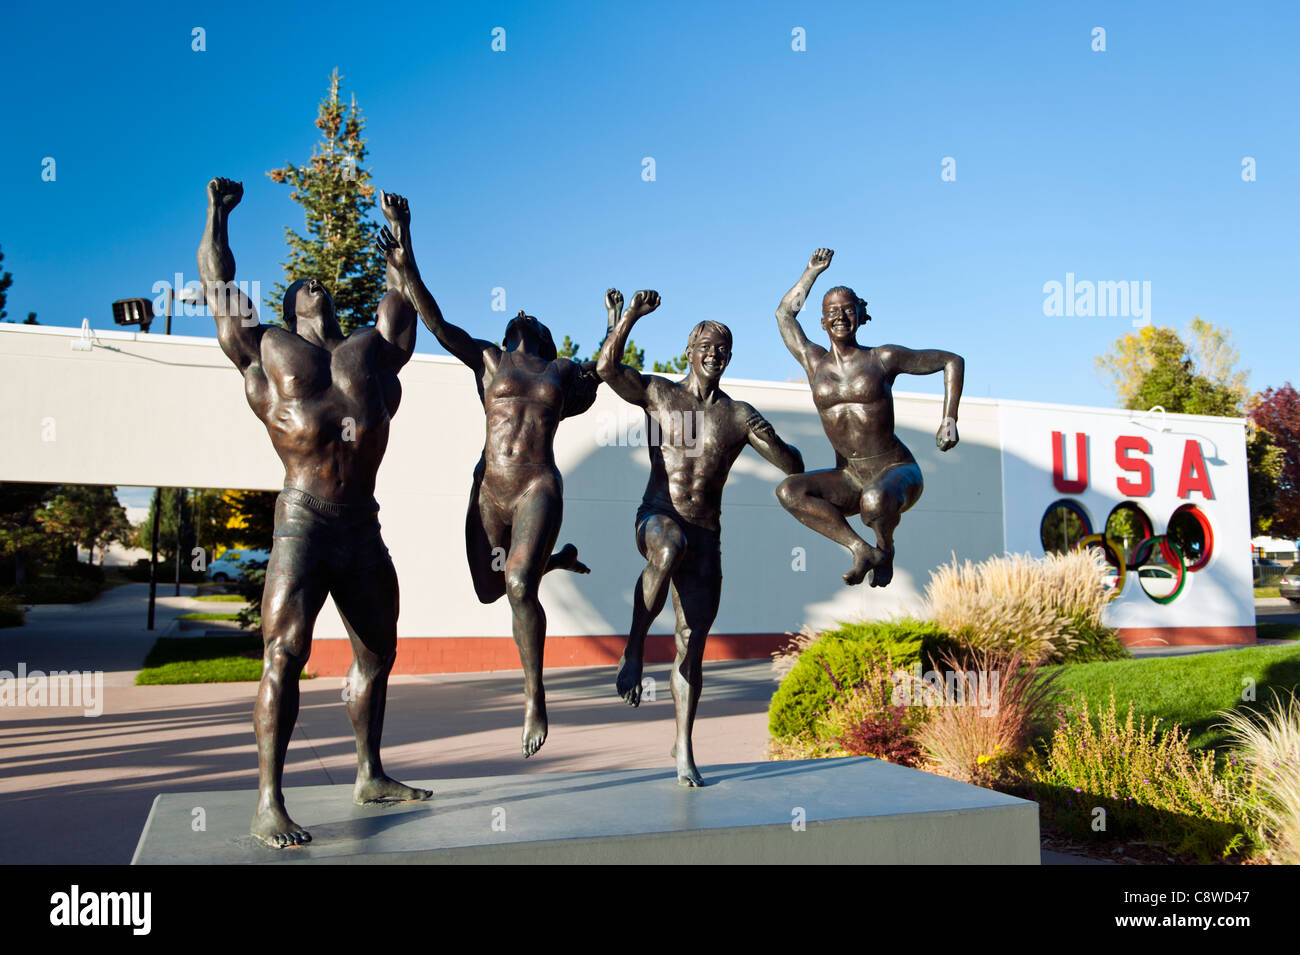 A sculpture in front of the U.S. Olympic Training Center, Colorado Springs, Colorado Stock Photo